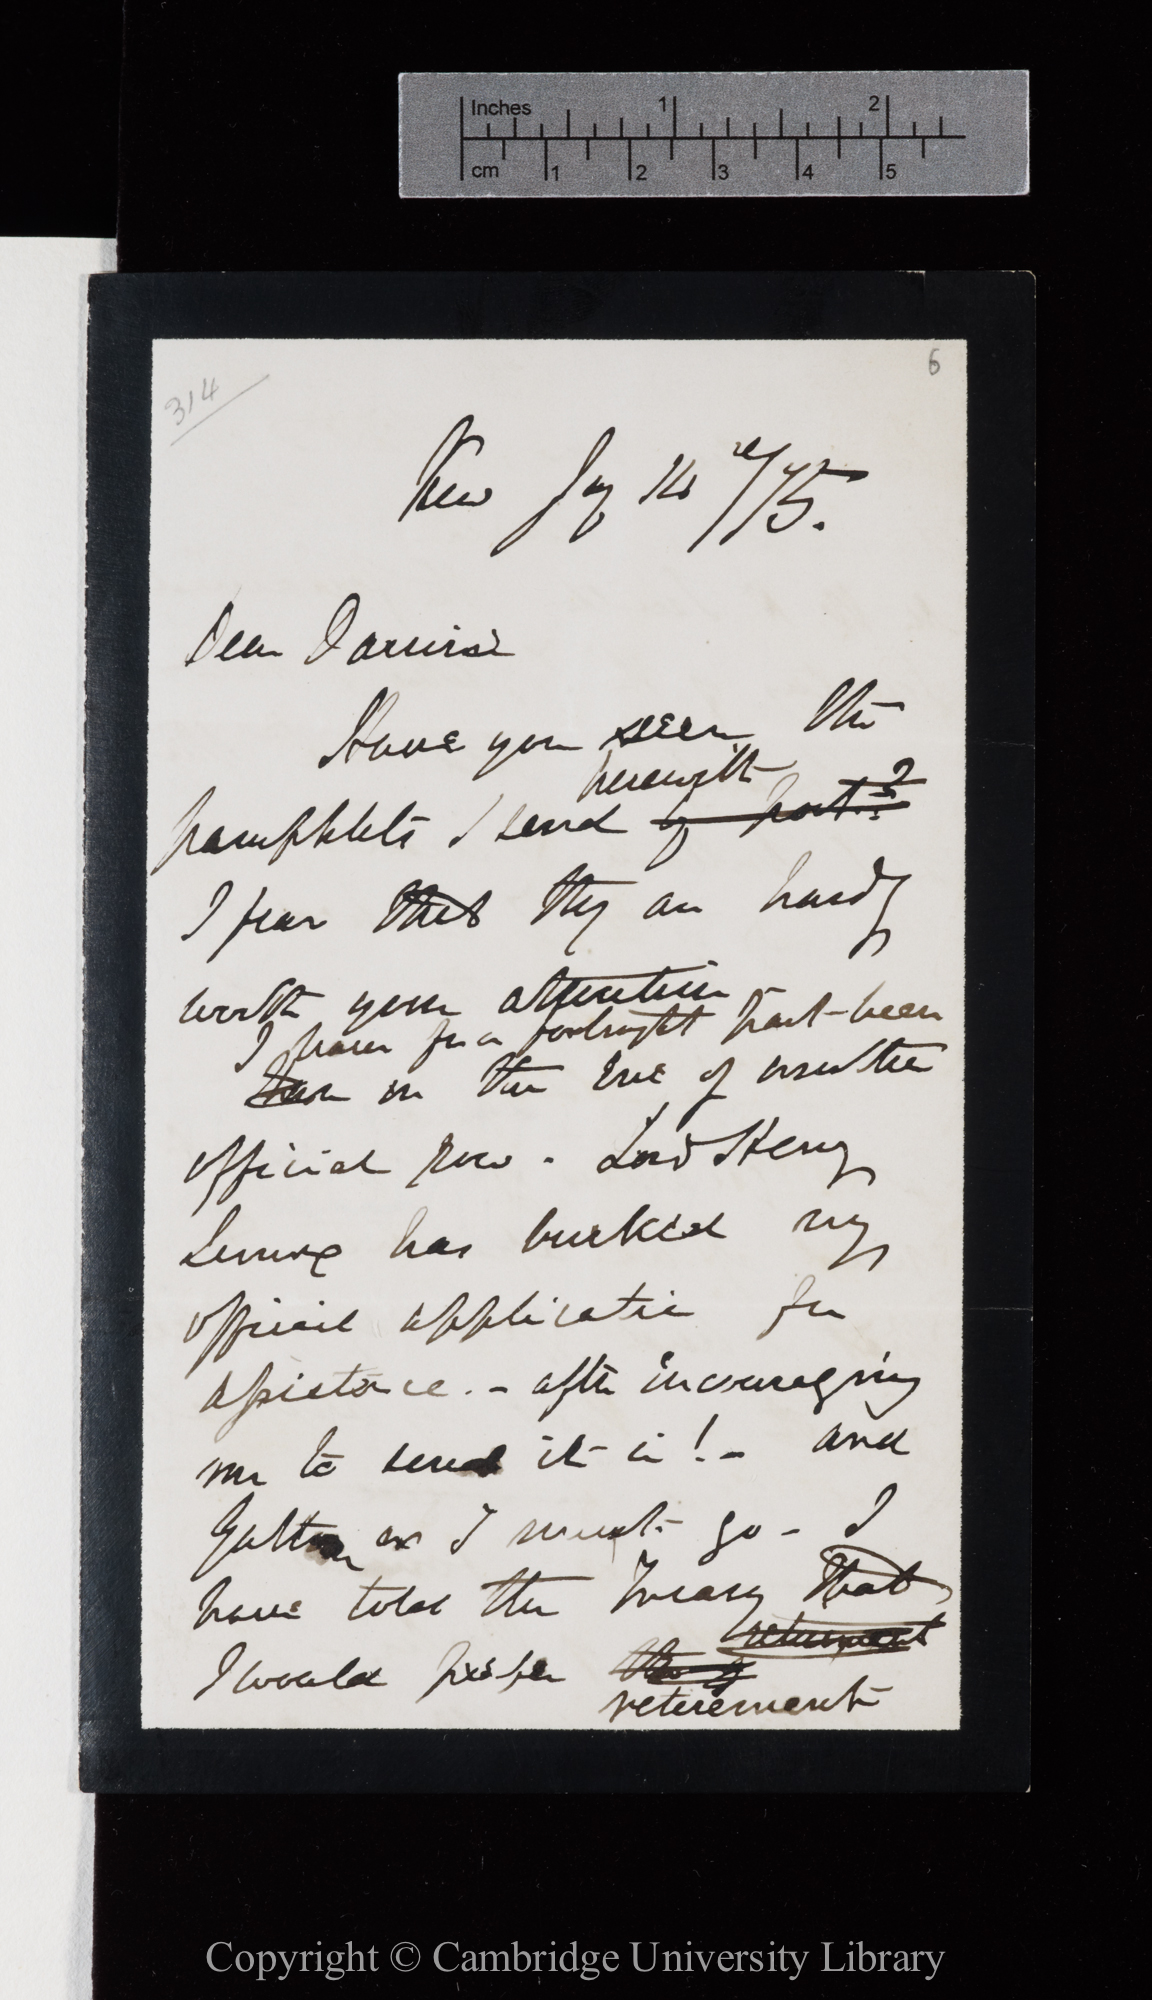 Letter from J. D. Hooker to C. R. Darwin   14 January 1875